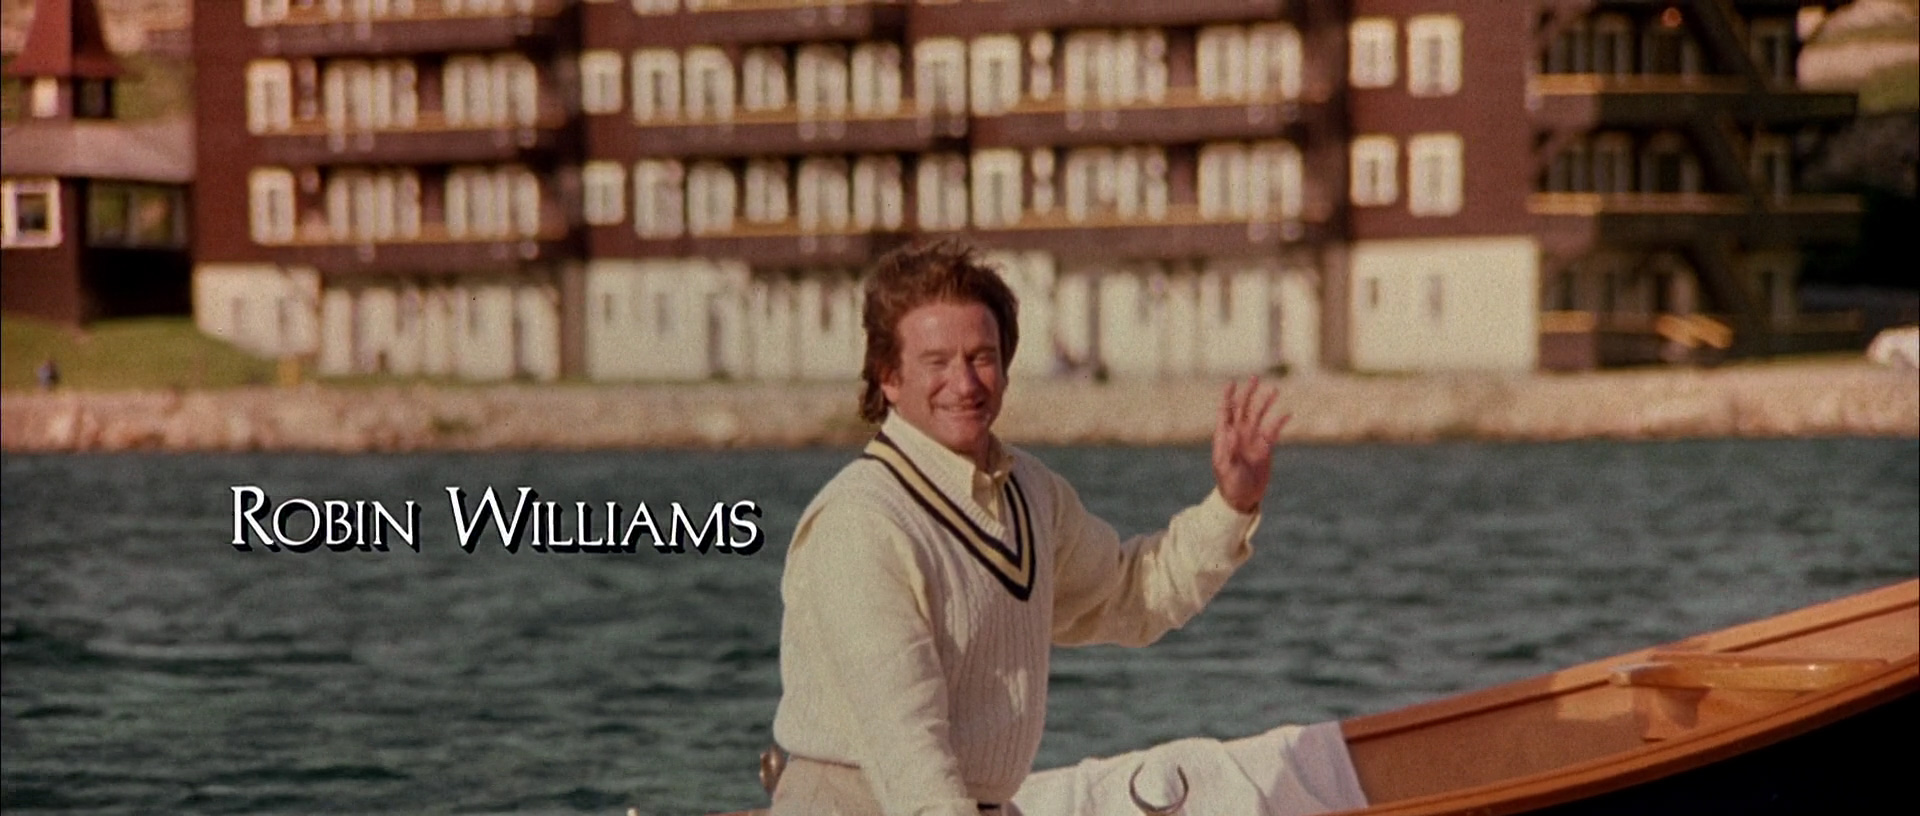 Robin Williams in What Dreams May Come